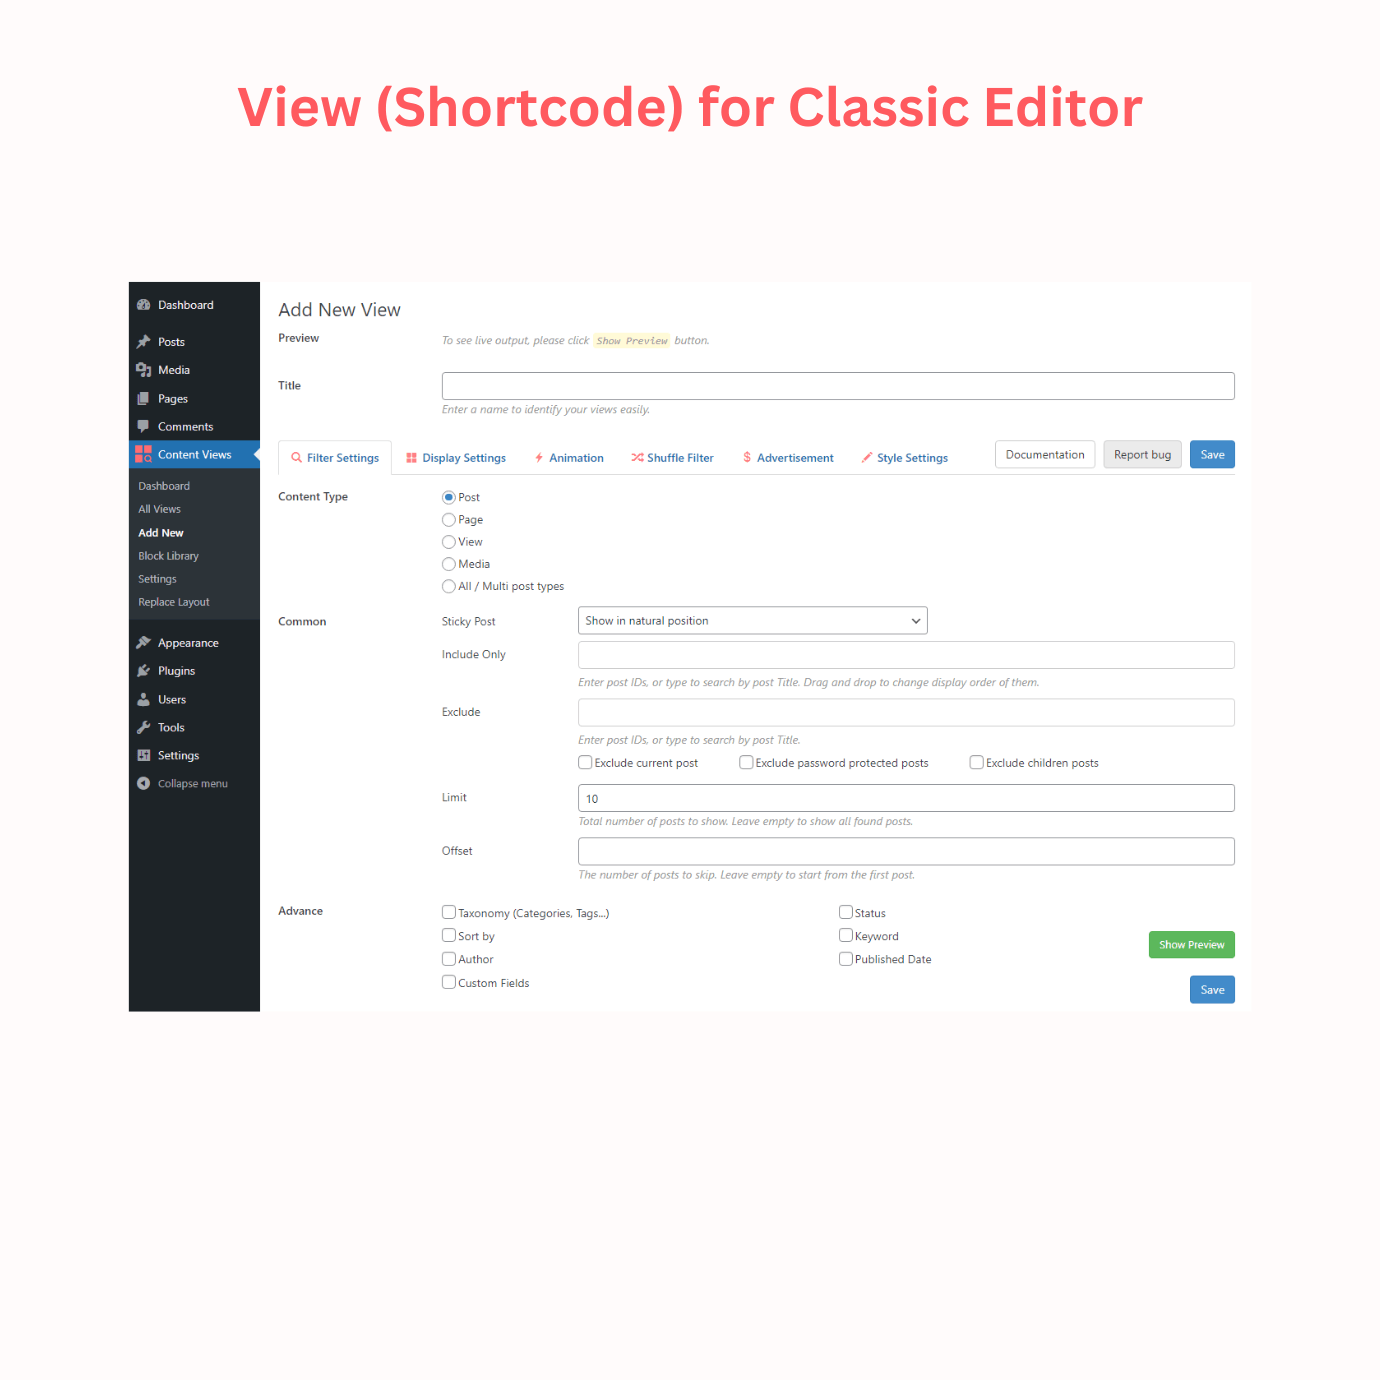 A powerful module to filter and display any posts in the Classic Editor using shortcode